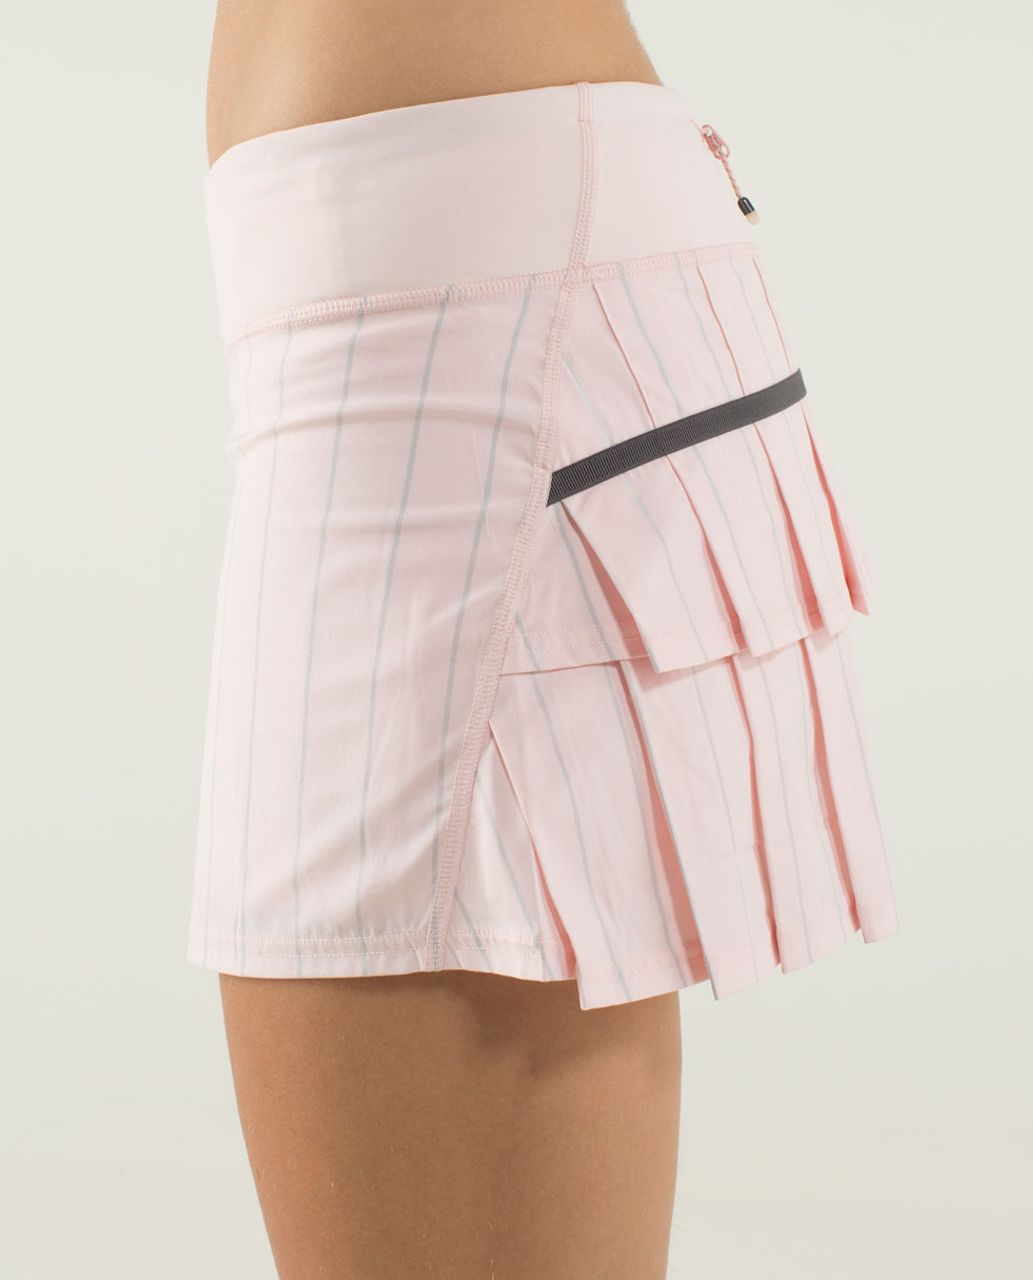 Lululemon Run: Pace Setter Skirt - Wee Are From Space Black March